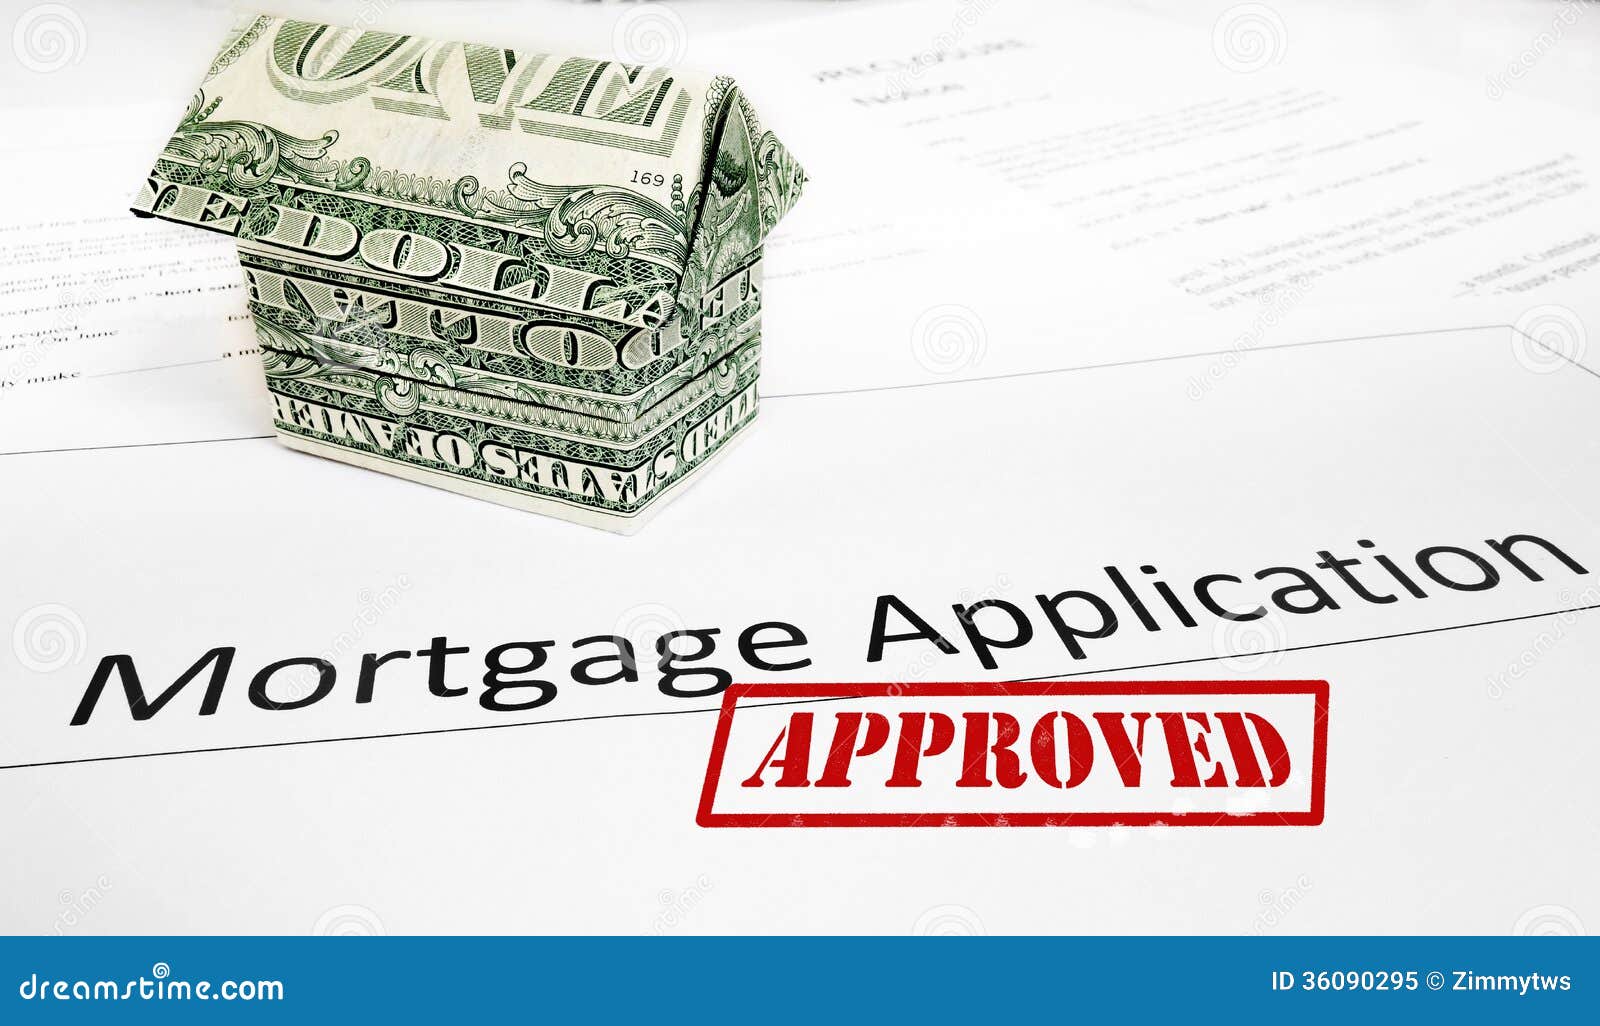 Mortgage app approval stock image Image of house 